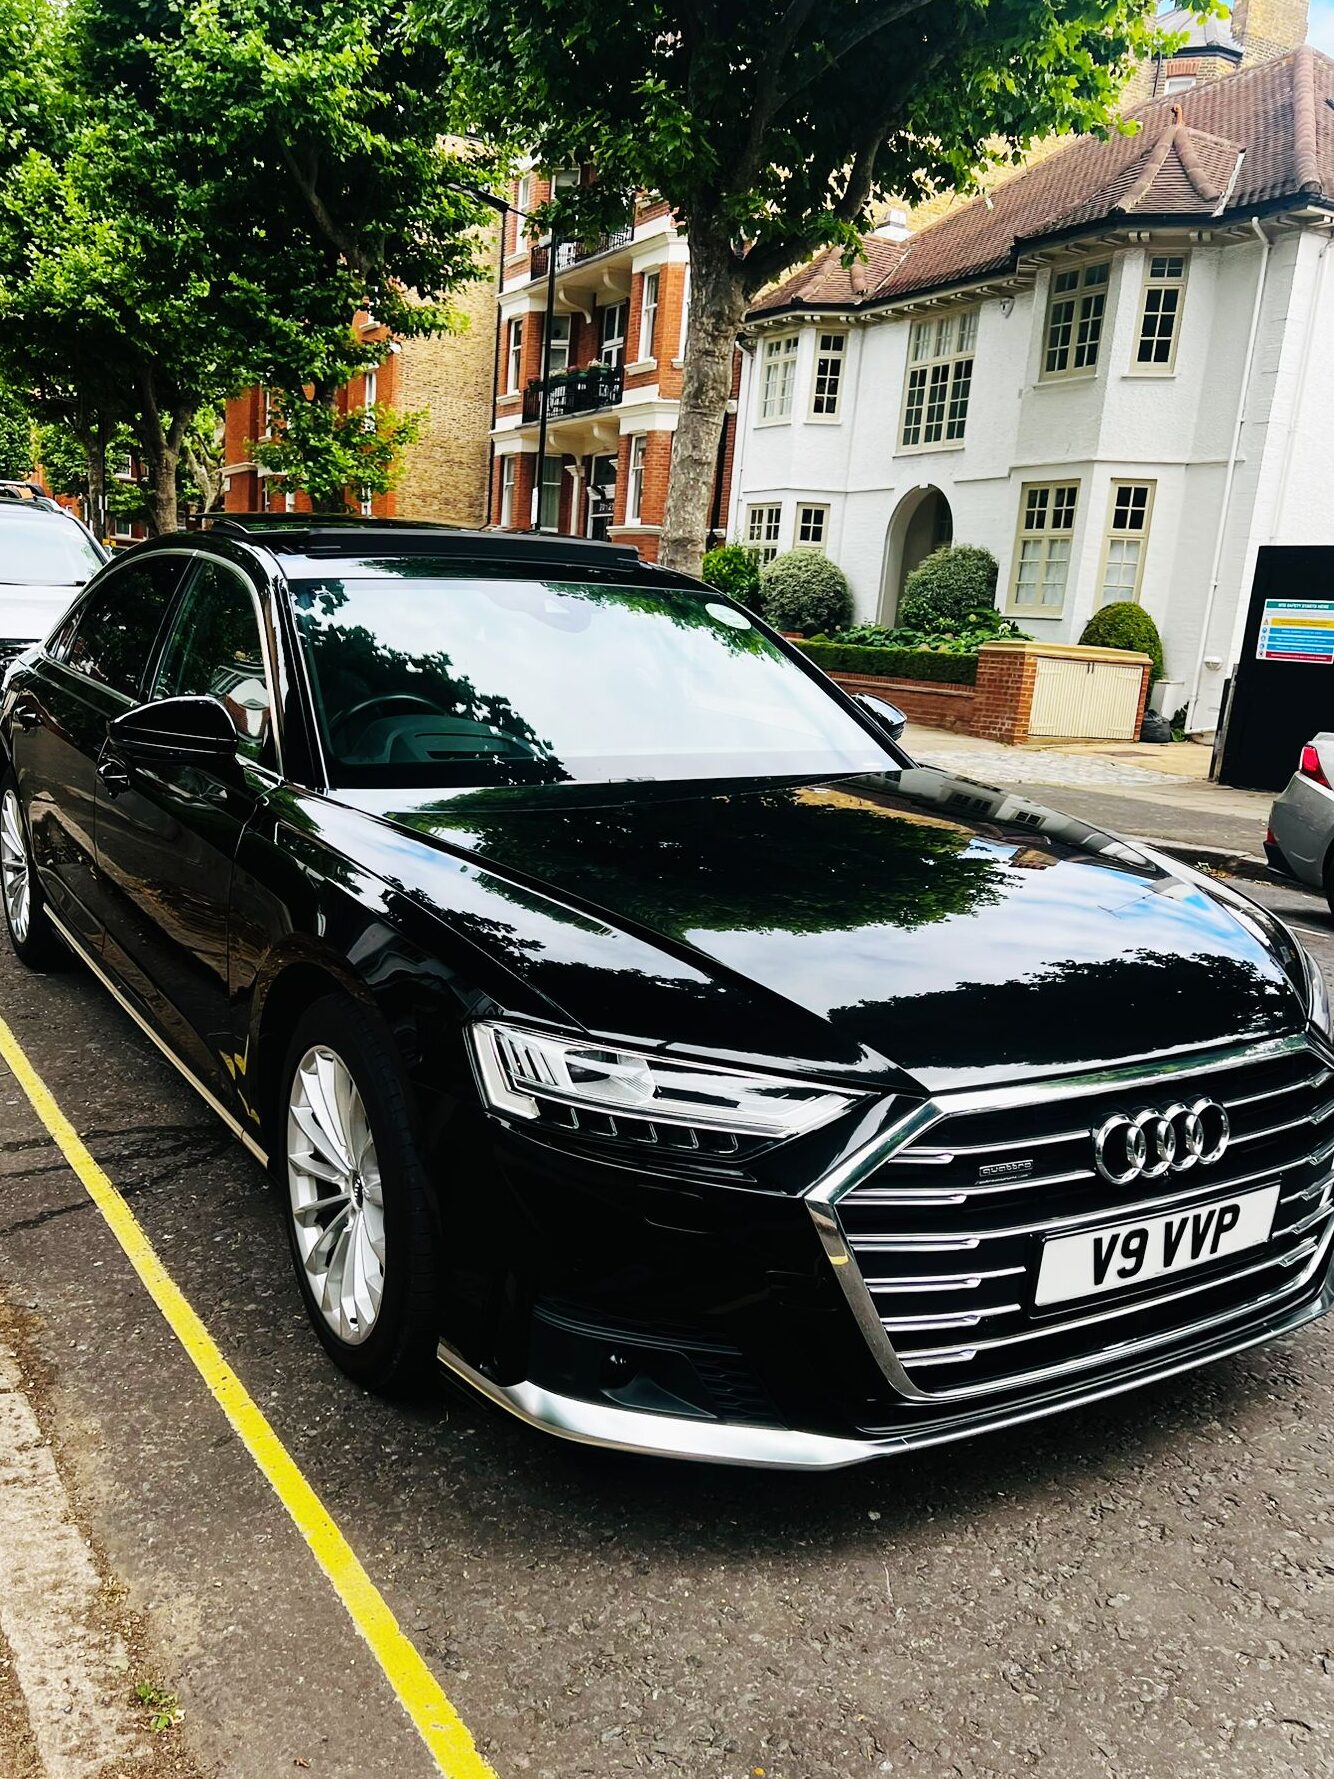 PCO car london with chauffeur